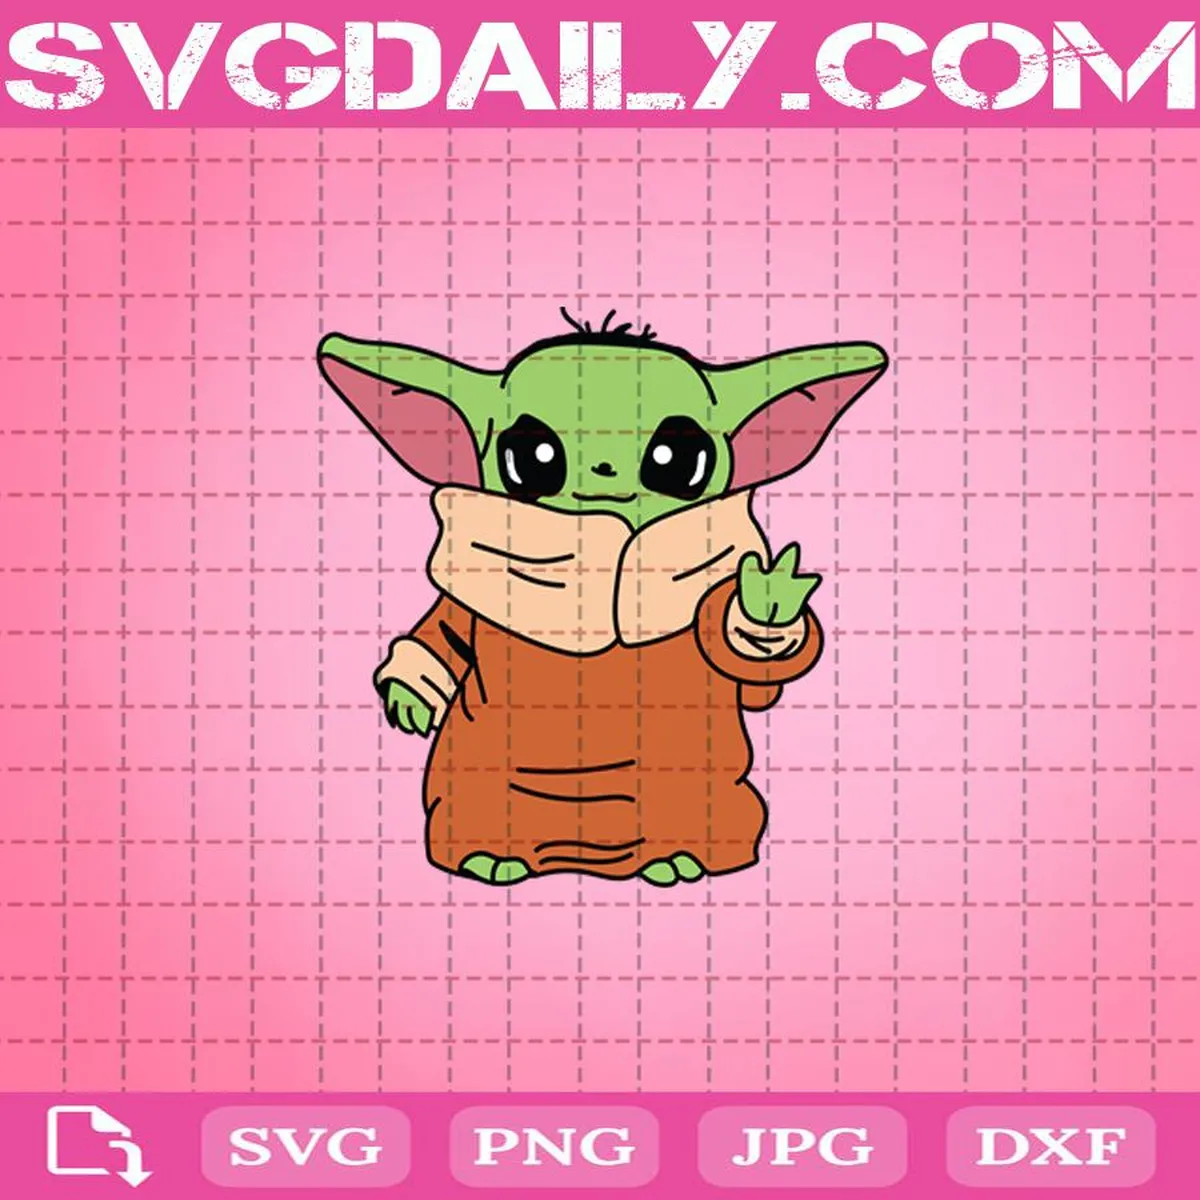 Star Wars Baby Yoda The Child Cartoon Poses Svg, Baby Yoda Svg, Star Wars Svg, Cute Yoda Svg, Baby Yoda Gifts Svg